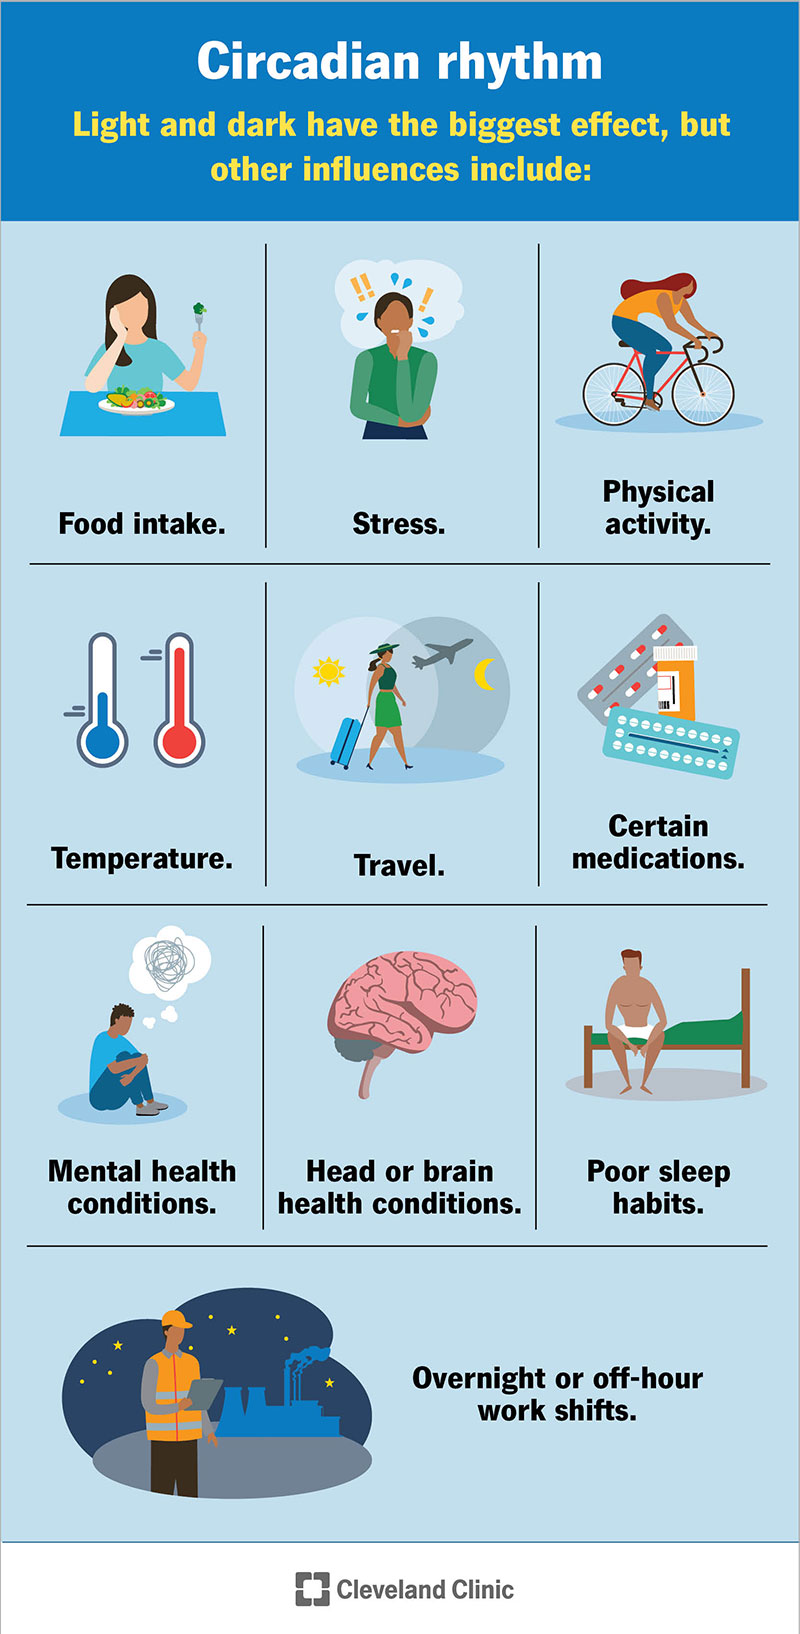 Factors that can affect your circadian rhythm, like light and dark